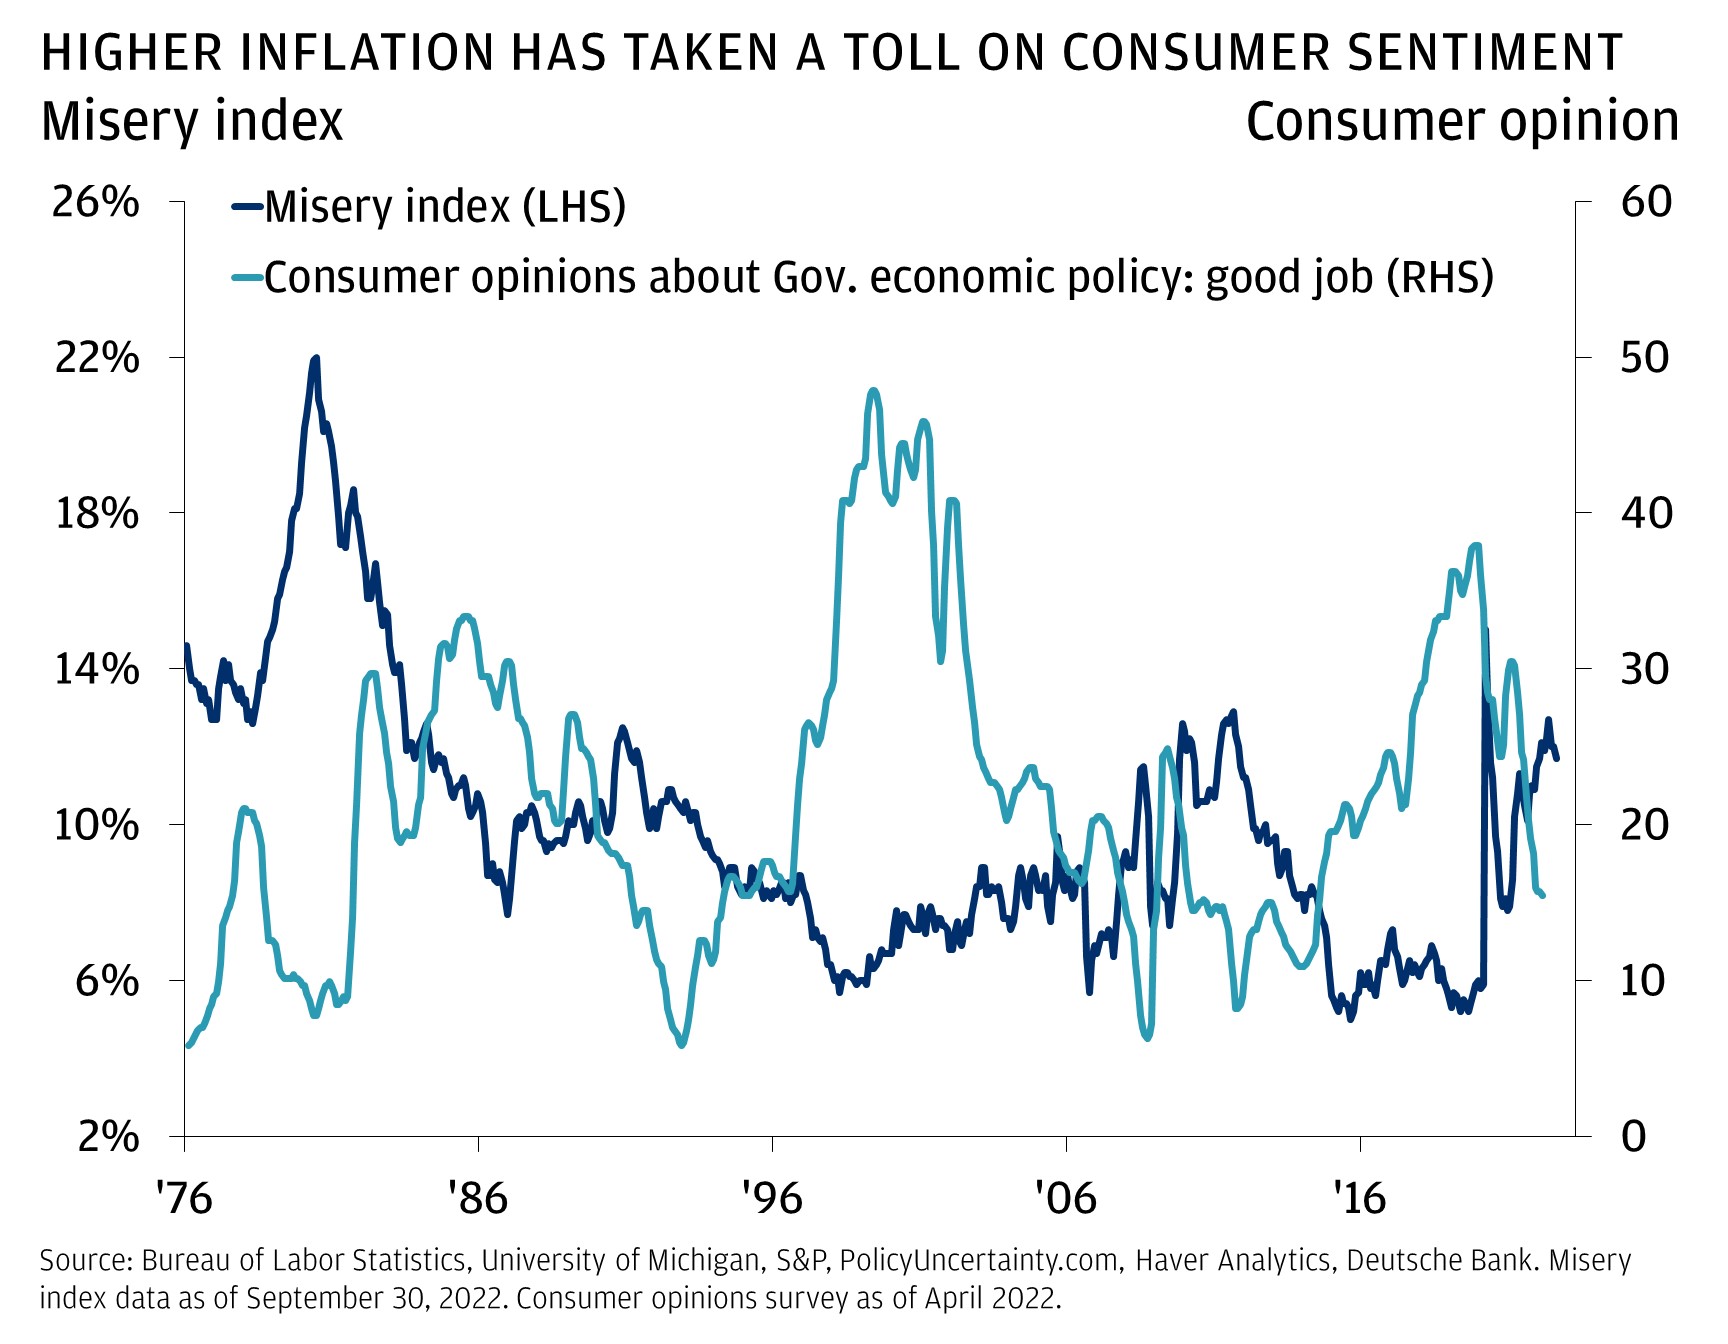 This chart shows the misery index and consumer opinion from January 31, 1976, until September 30, 2022.